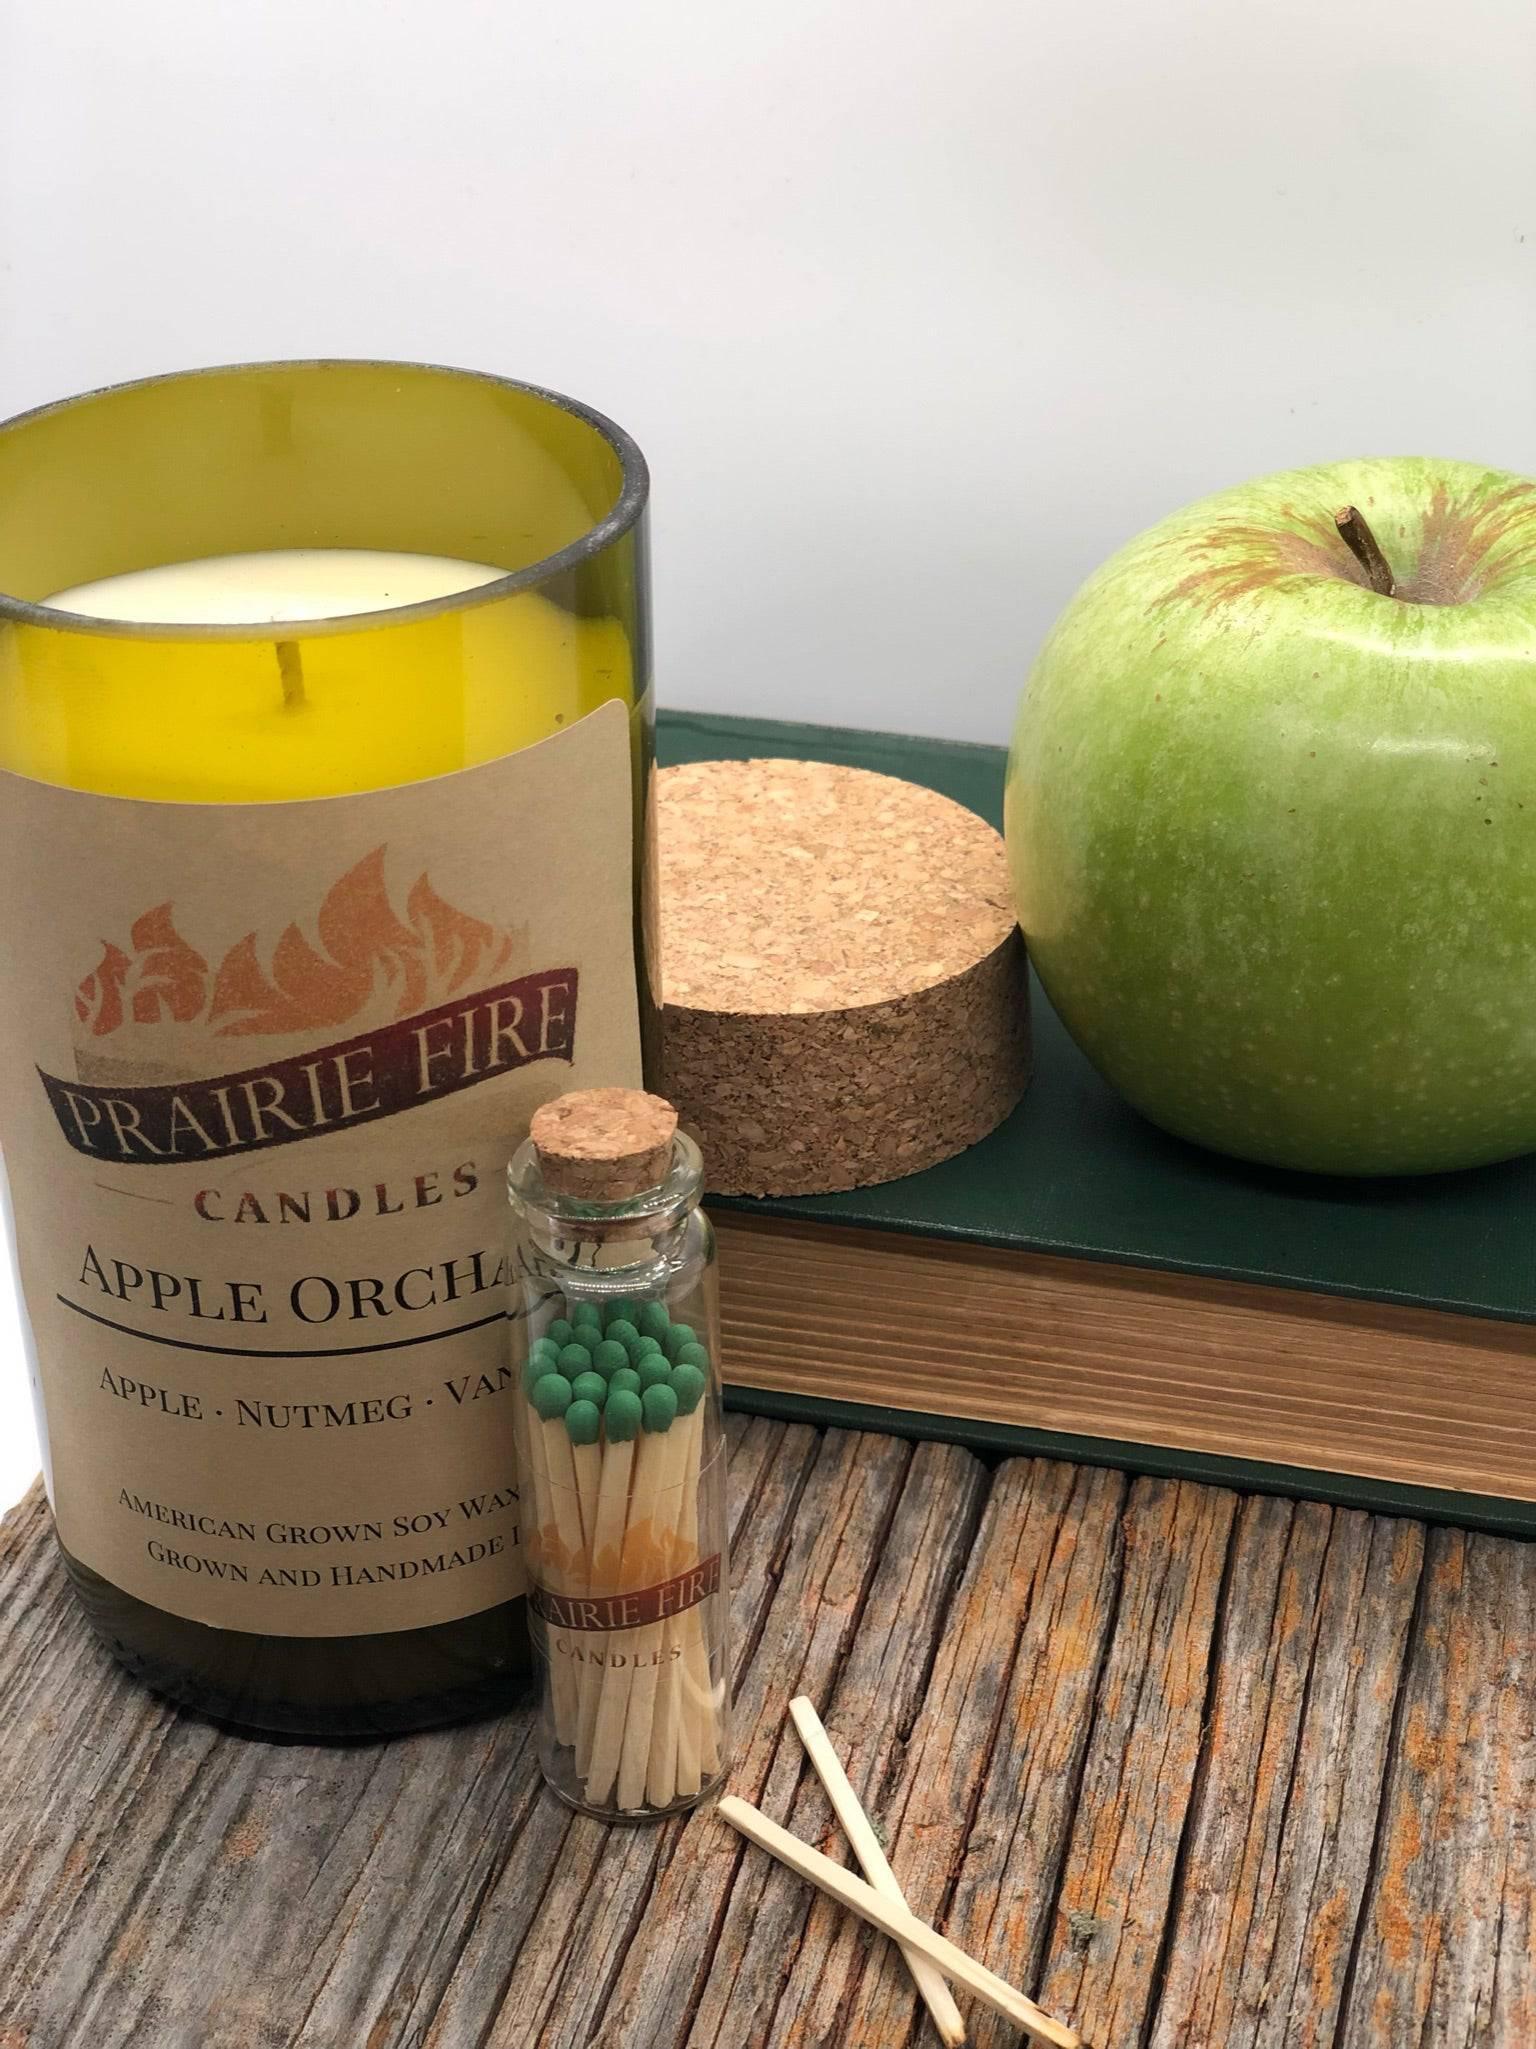 Apple Orchard Soy Wax Candle | Repurposed Wine Bottle Candle Natural Cork | Handmade in USA Candle | Eco-Friendly Candle | Non-Toxic Soy Candle - Prairie Fire Candles